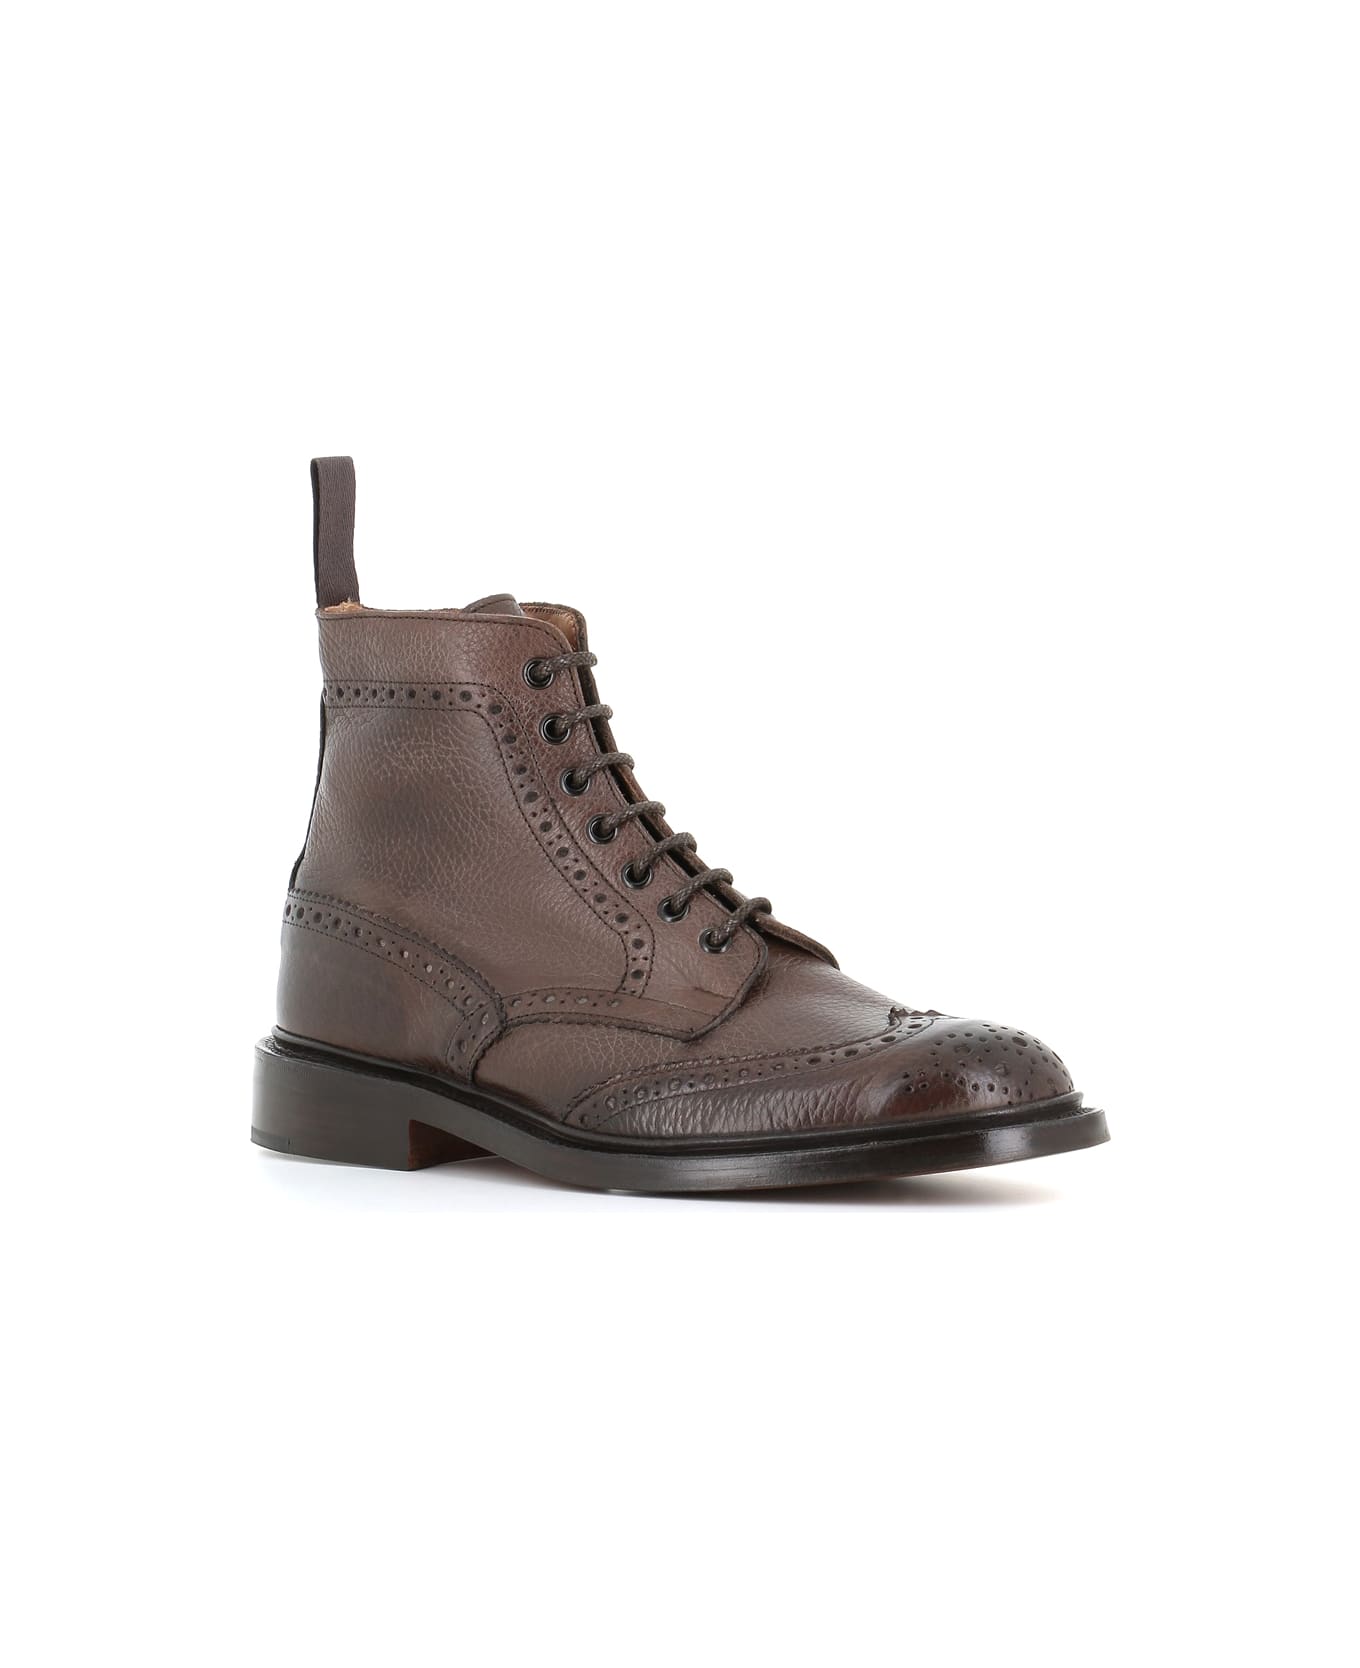 Tricker's Stow Country Boot - Dark brown